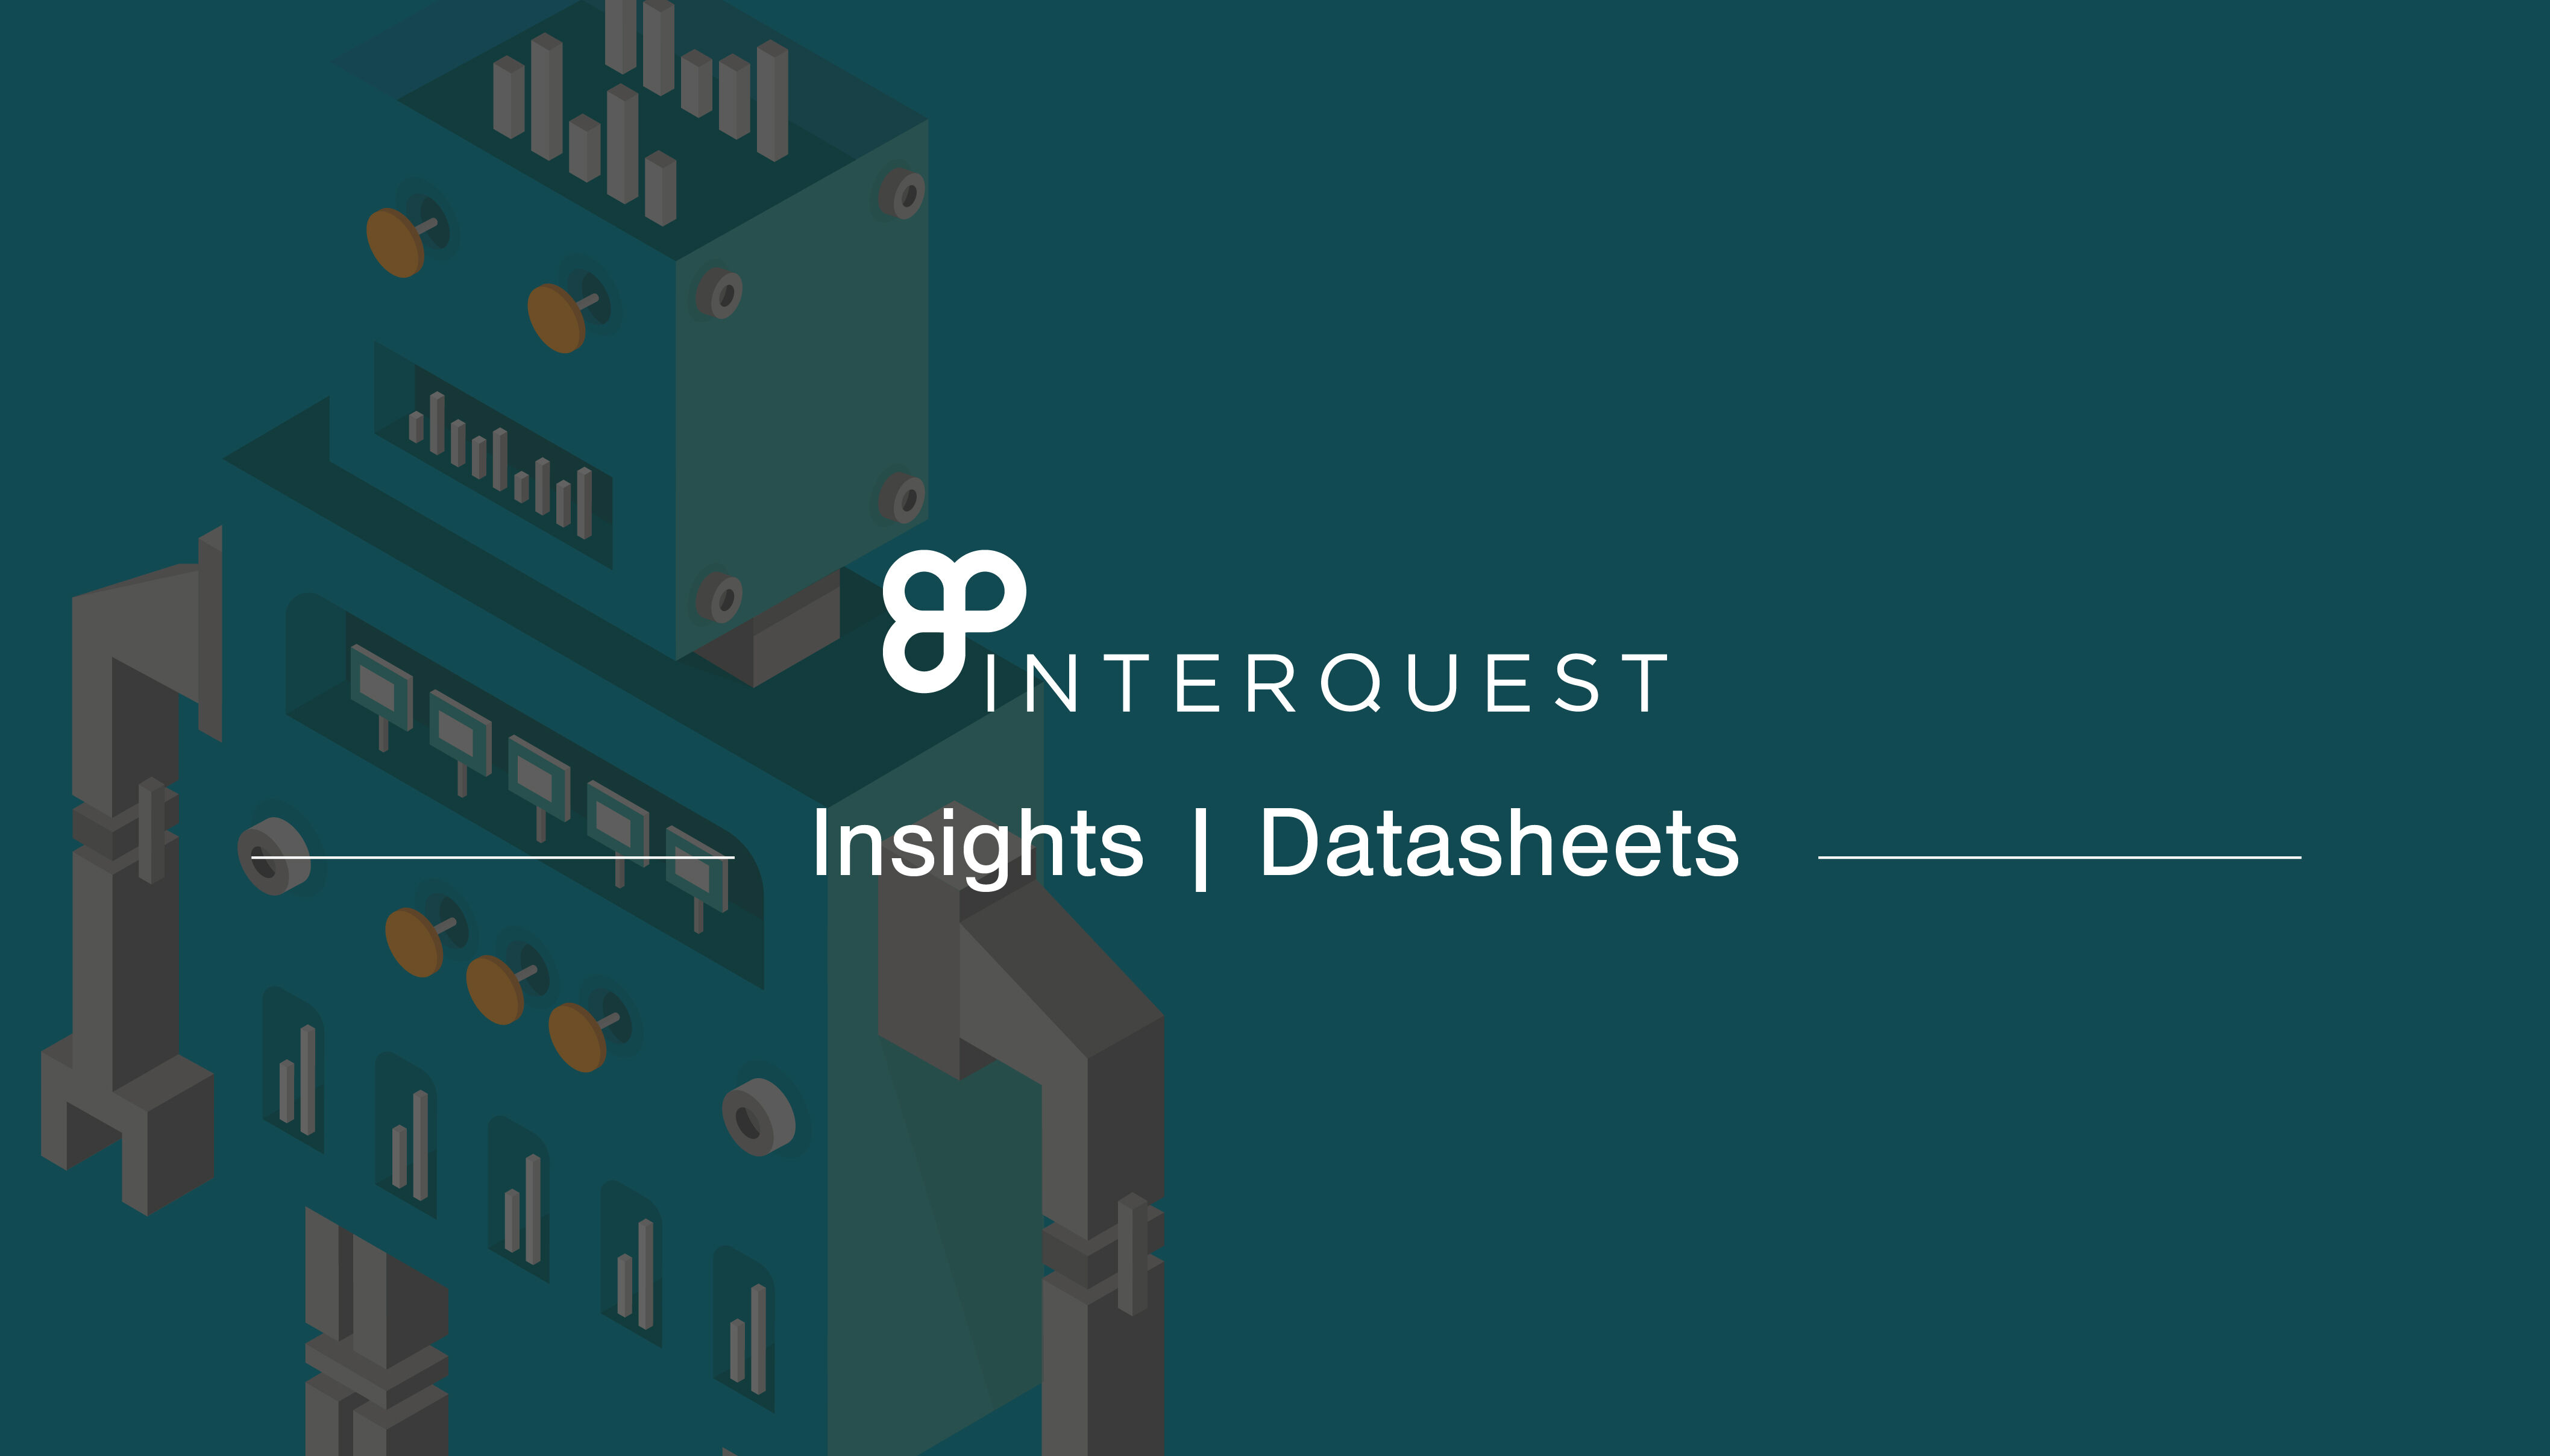 InterQuest Insights banner for an infographic about maturing artificial intelligence technology